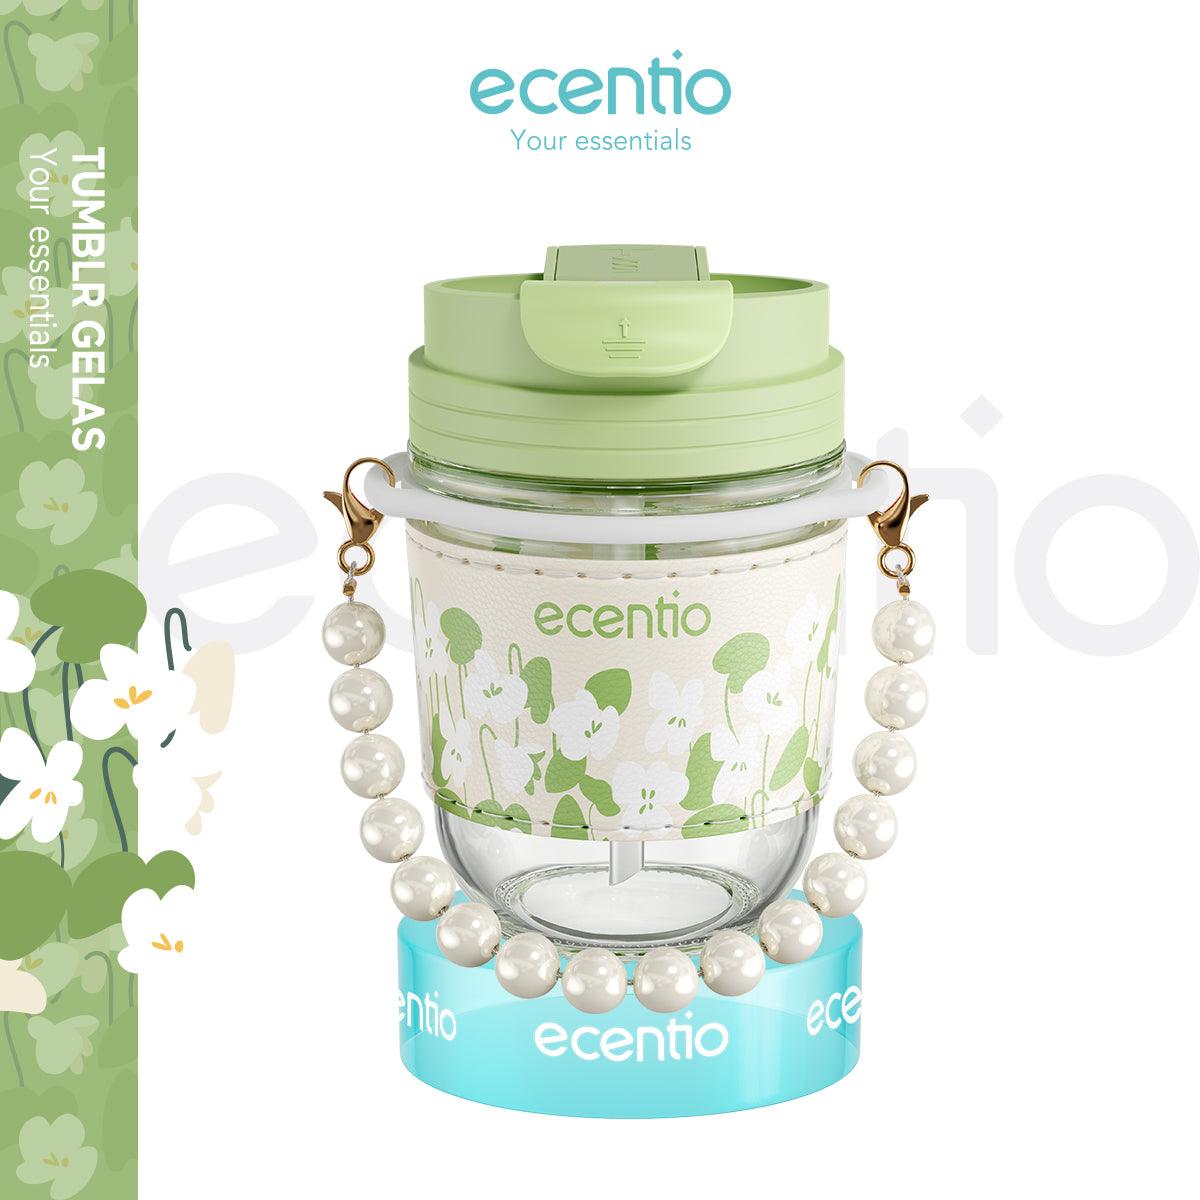 ecentio “Green Whispers” tumblers Botol Minum Pearl Glass 350ML - ecentio